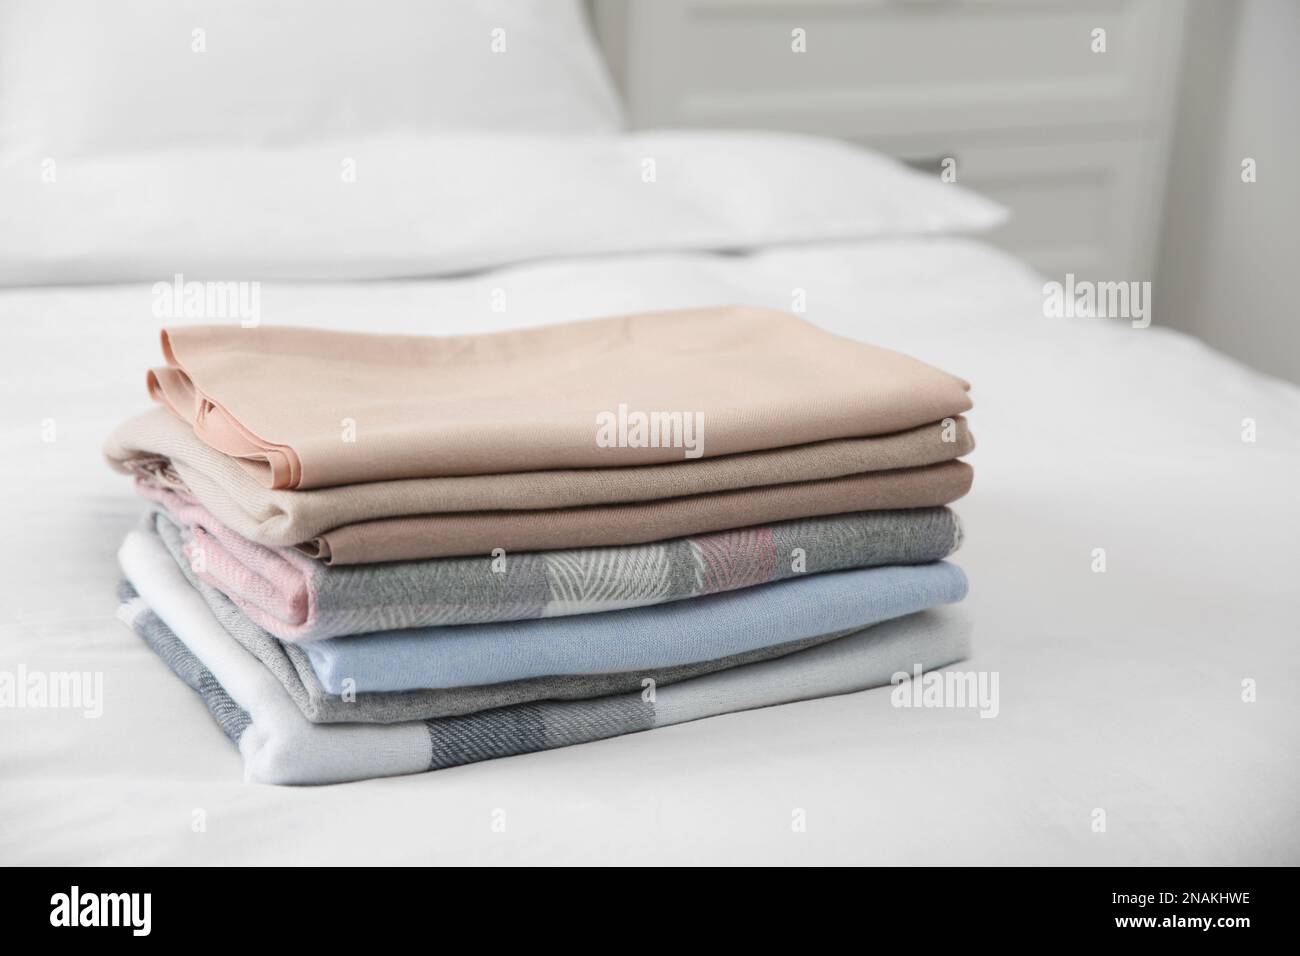 Stack of folded cashmere clothes on bed Stock Photo - Alamy